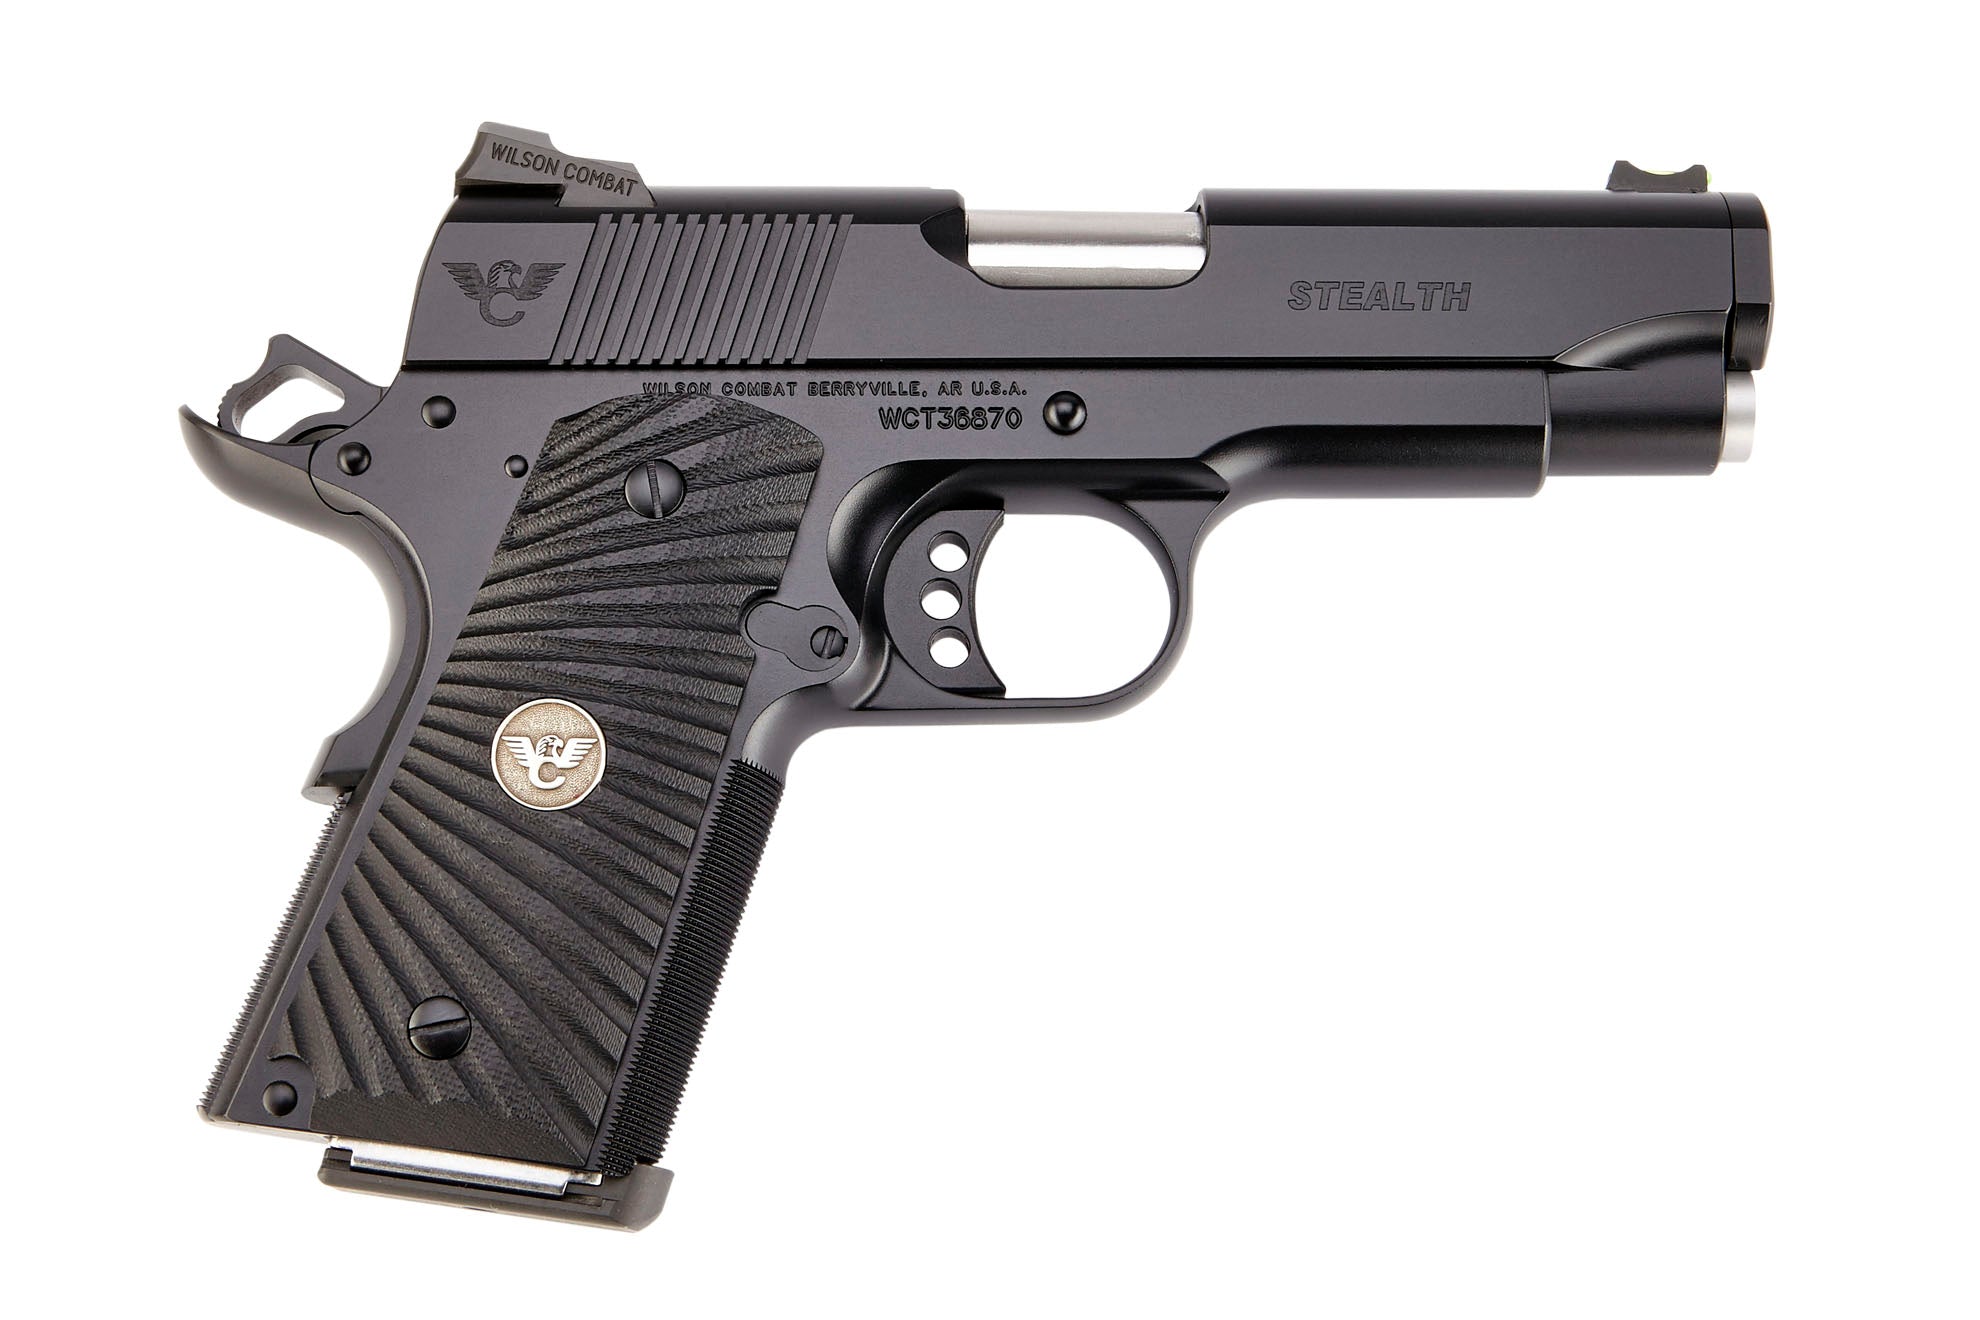 Wilson Combat Stealth Review: Pros and cons of the Stealth